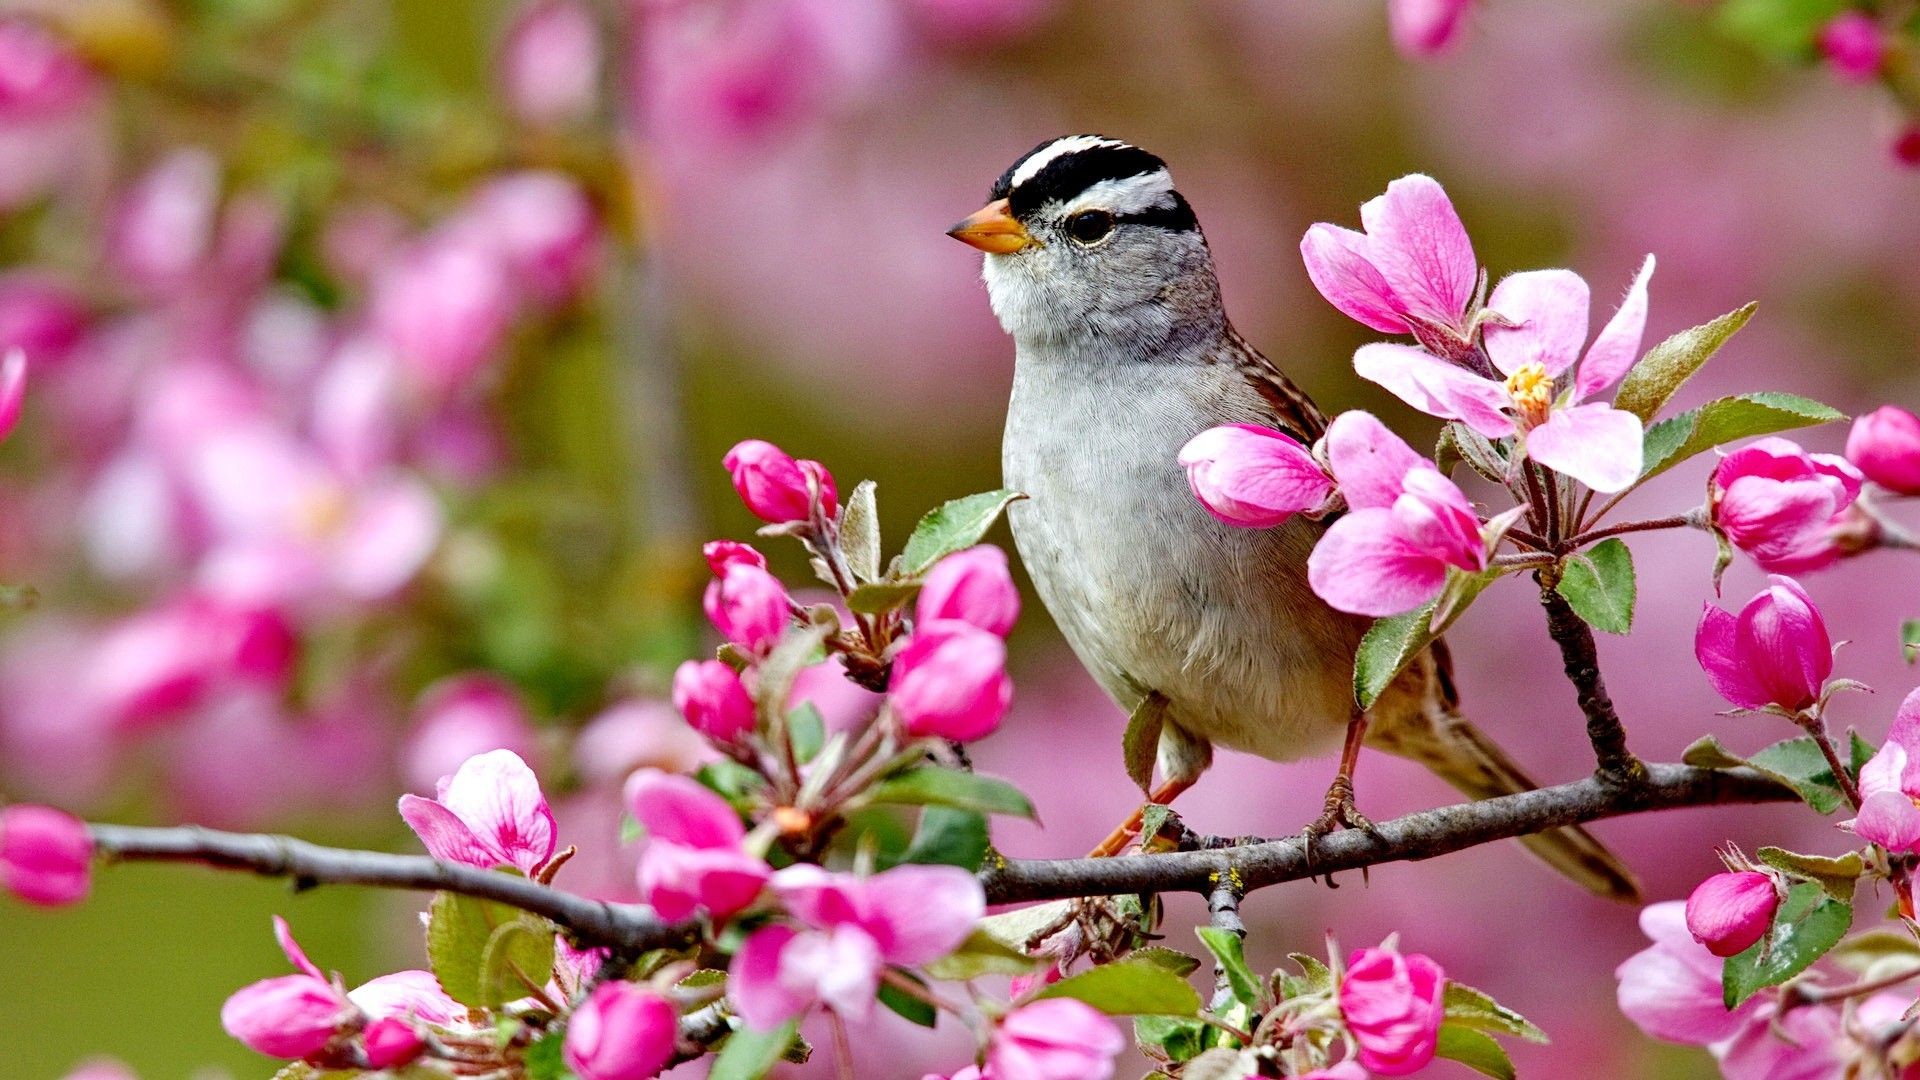 1920x1080 Flowers: Bird Spring Flowers Colorful Forces Nature Colors Birds Splendor  Pink Tree Buds Landscpae Lovely Paradise Blossoms Best Wallpapers for High  ...